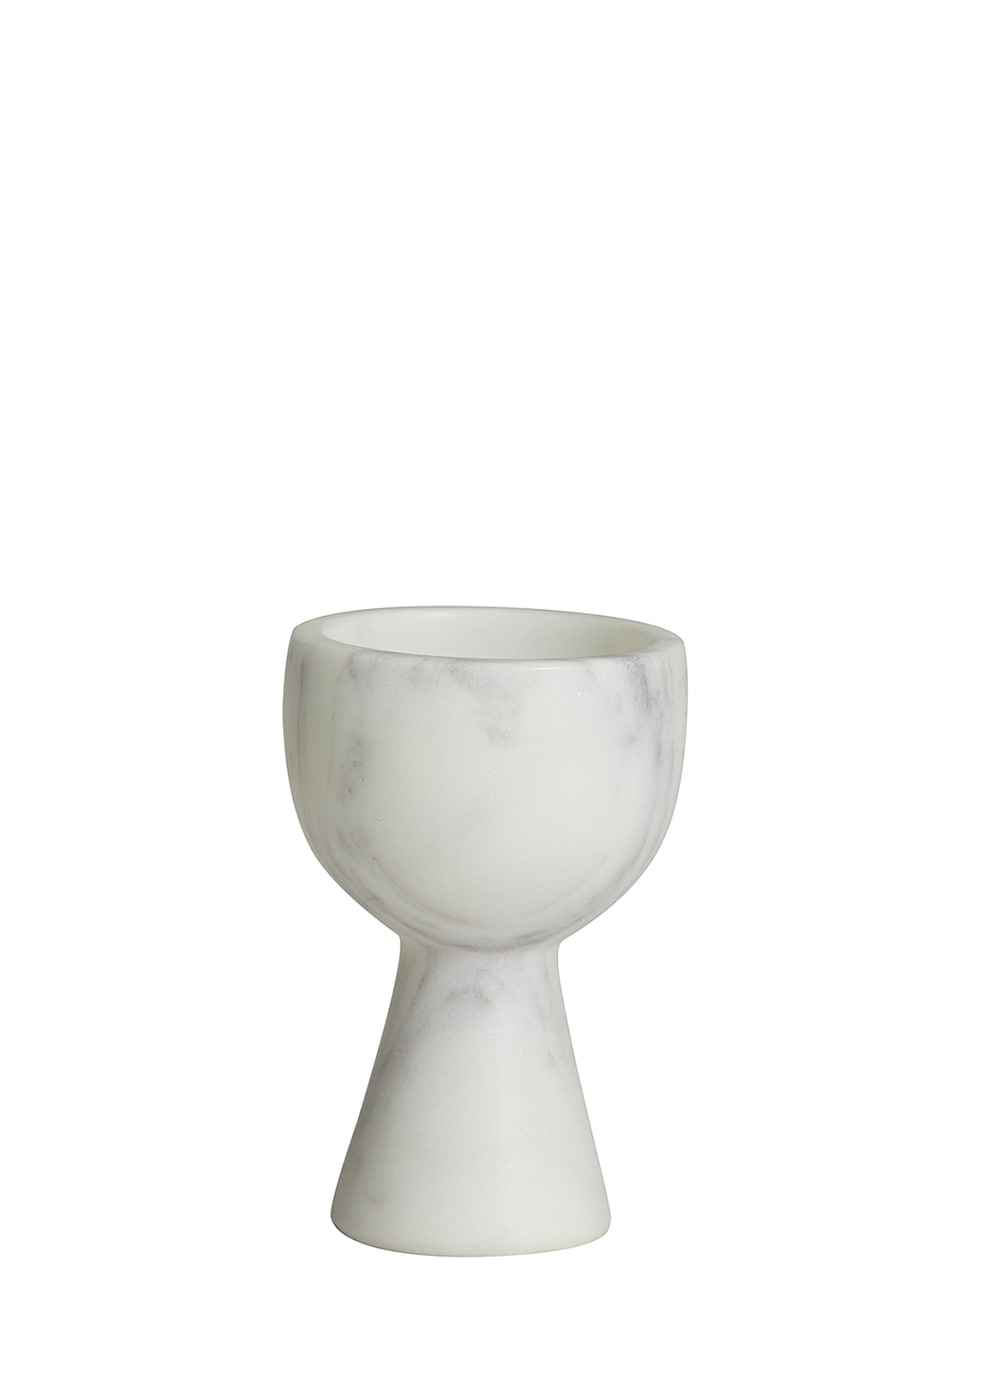 ISOP egg cup, white marble